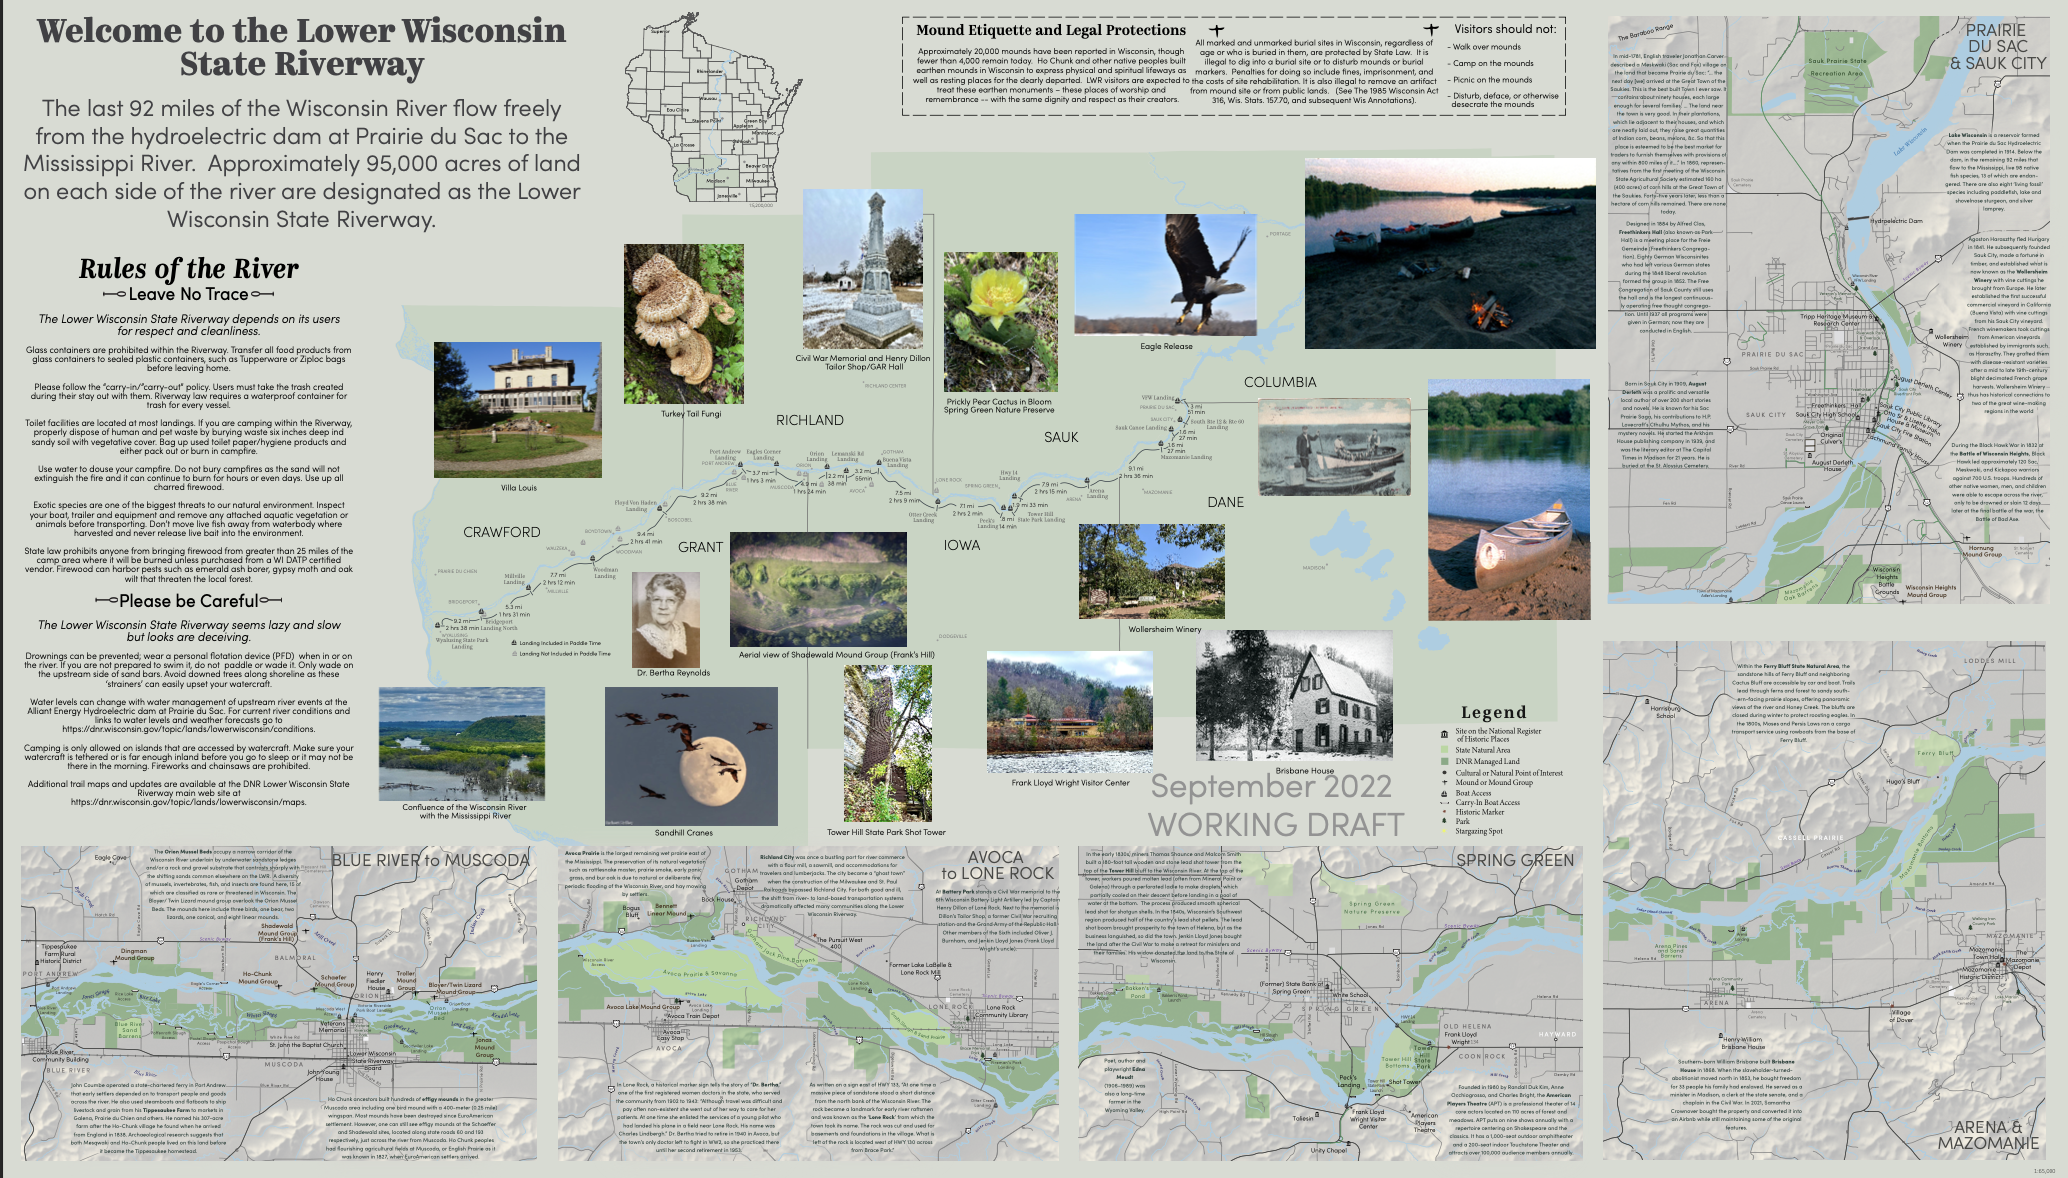 Map of the Lower Wisconsin Riverway